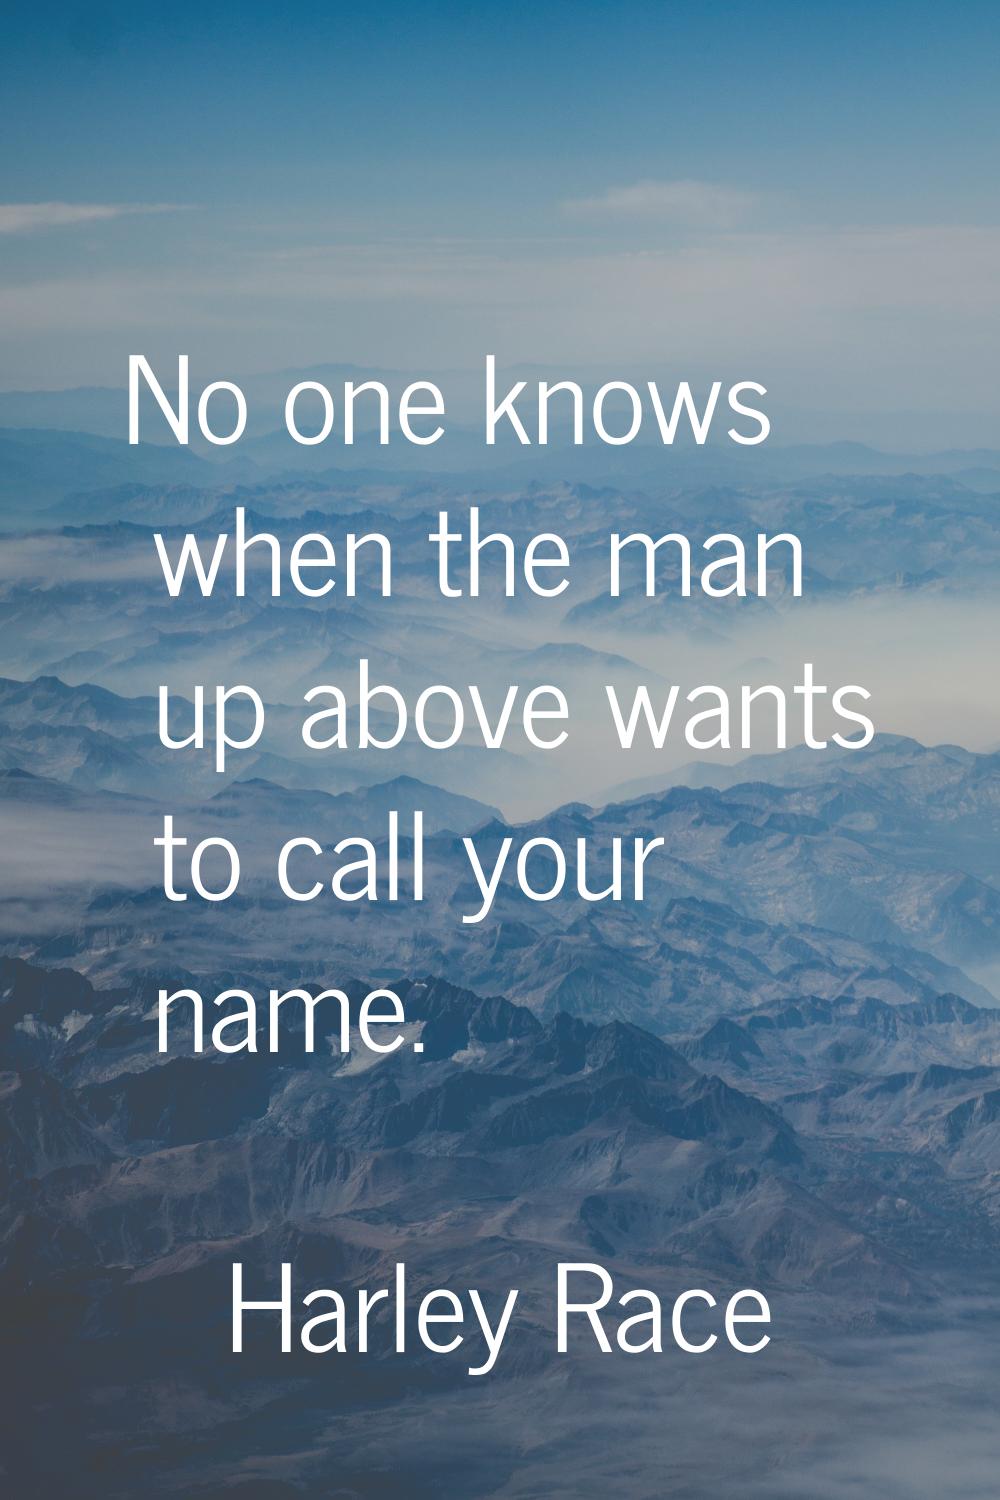 No one knows when the man up above wants to call your name.